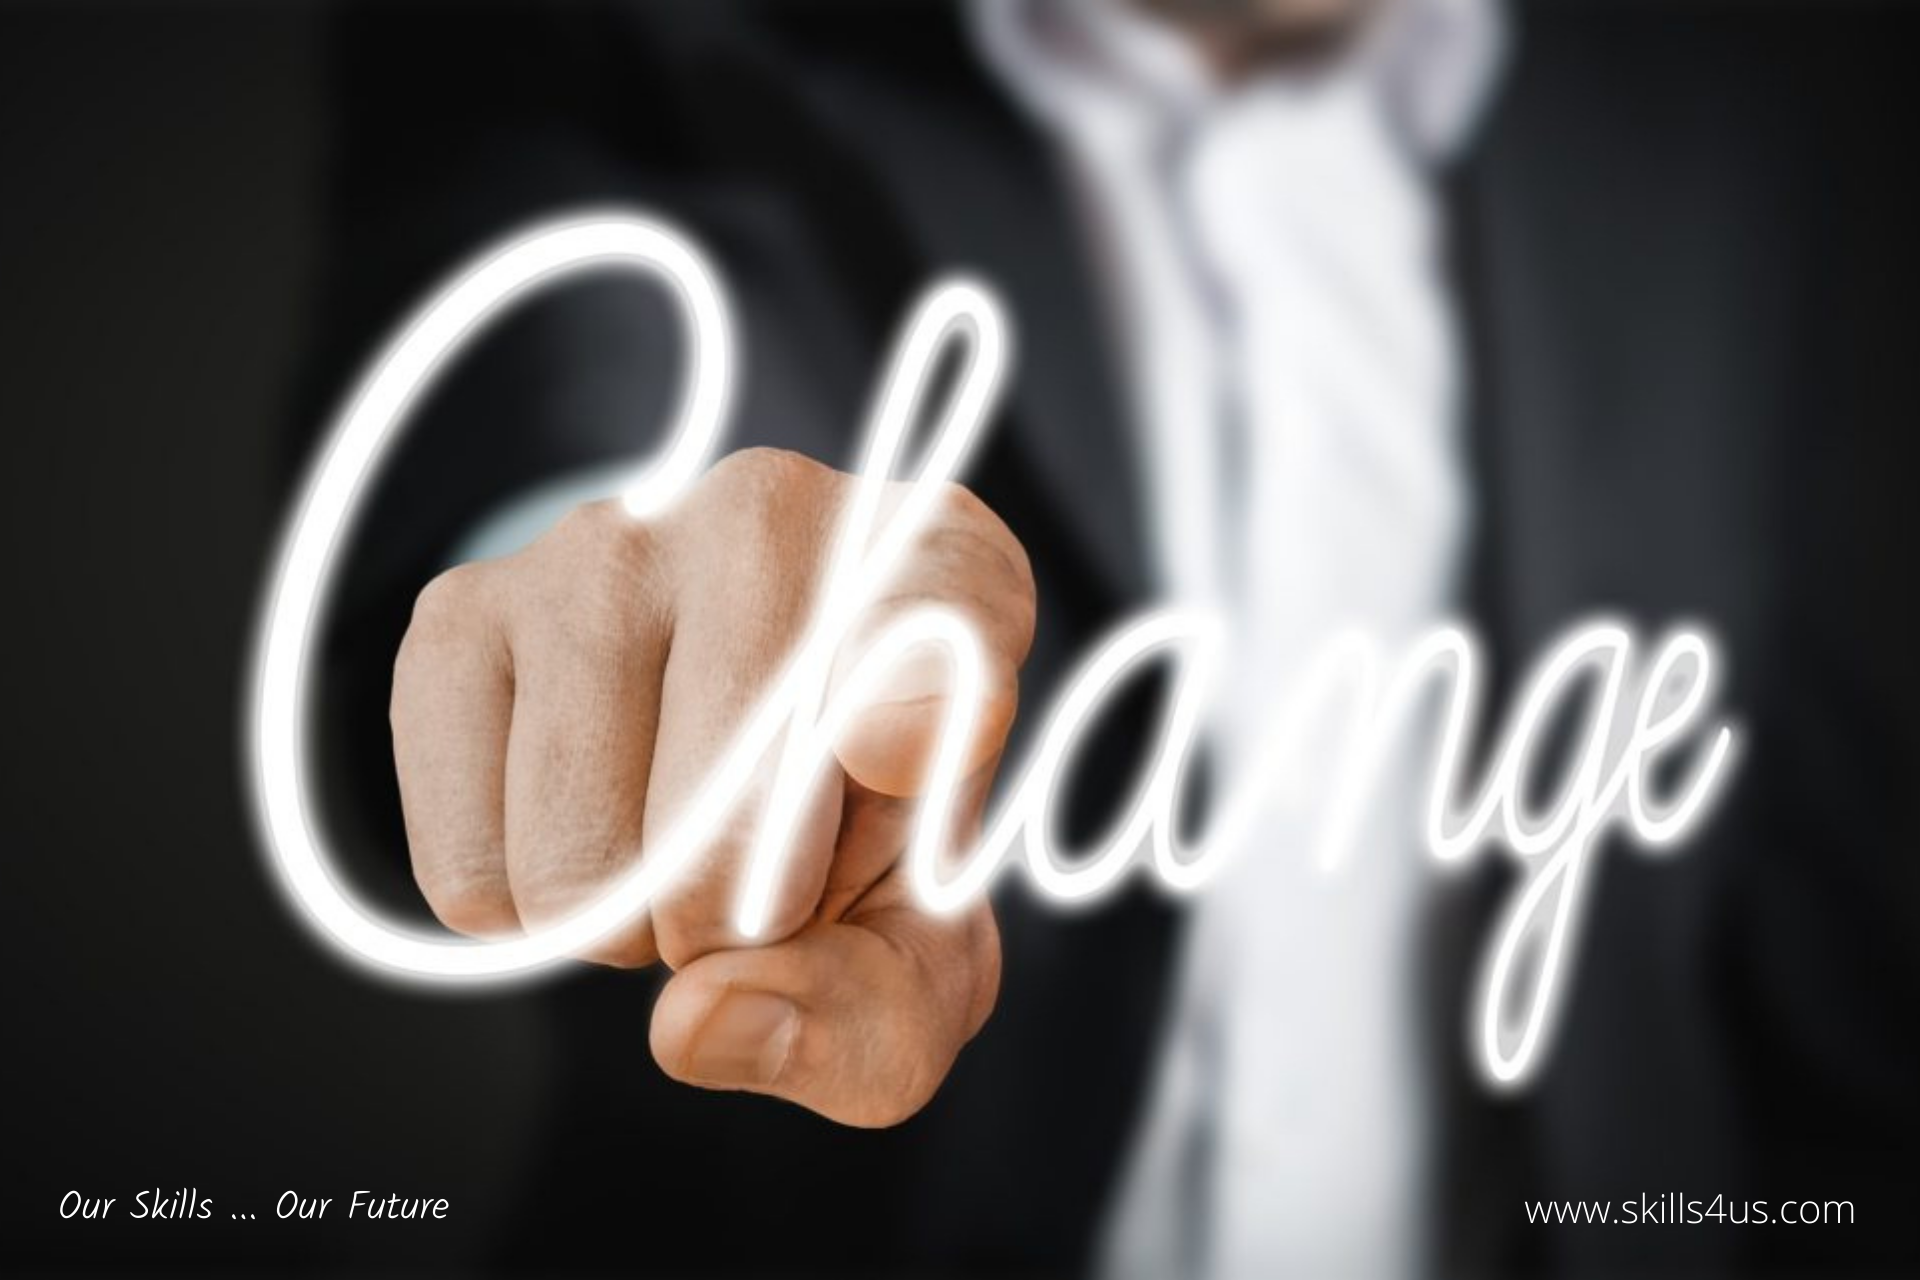 Change Management Not Impossible … But Never Stop Improving